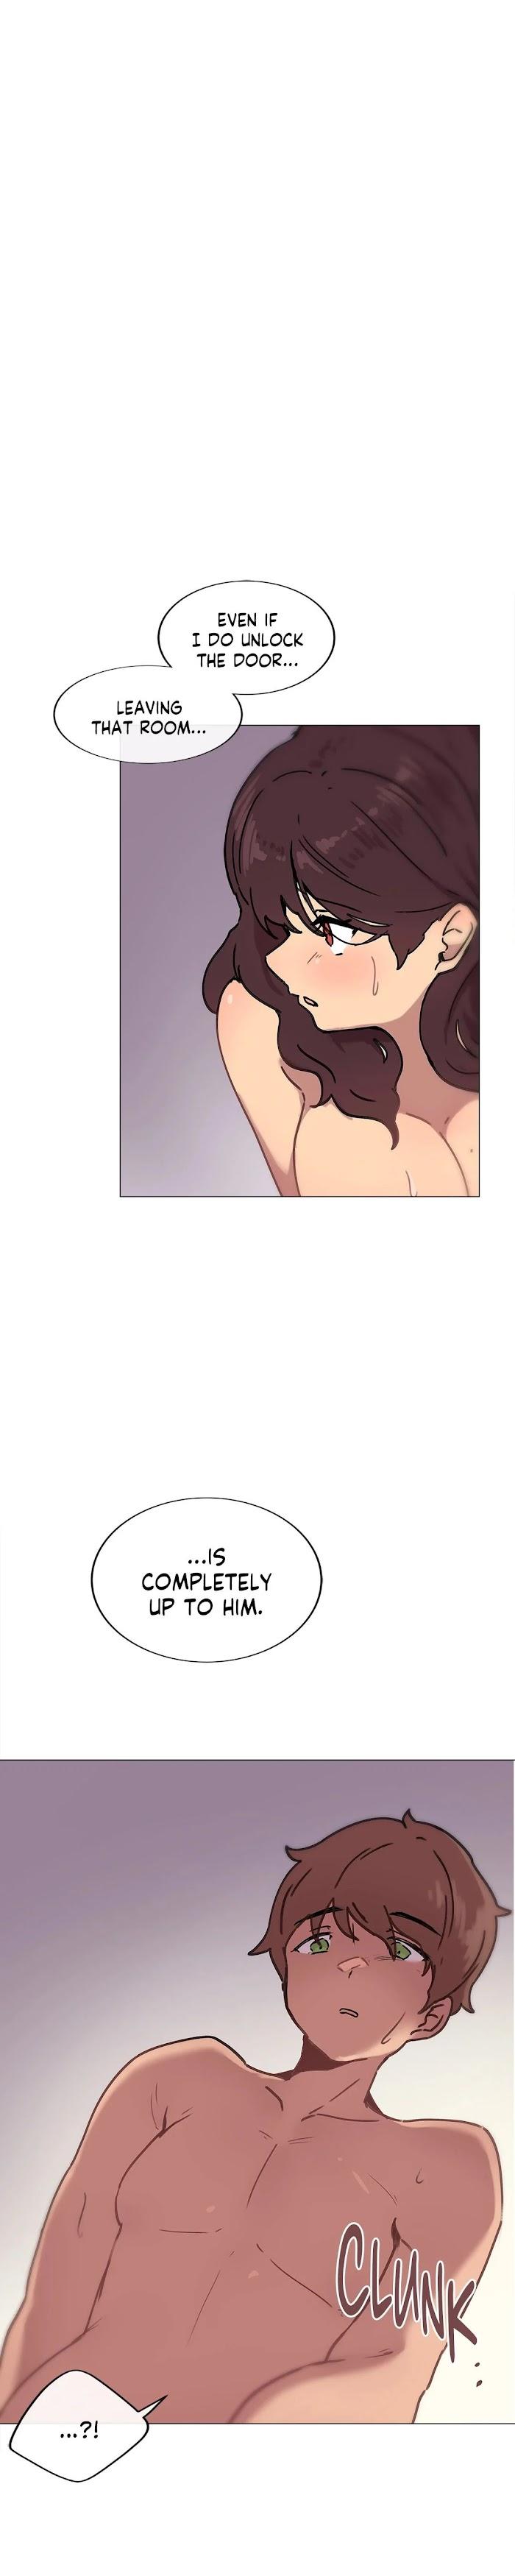 [Dumangoon, 130F] Sexcape Room: Wipe Out Ch.9/9 [English] [Manhwa PDF] Completed 201